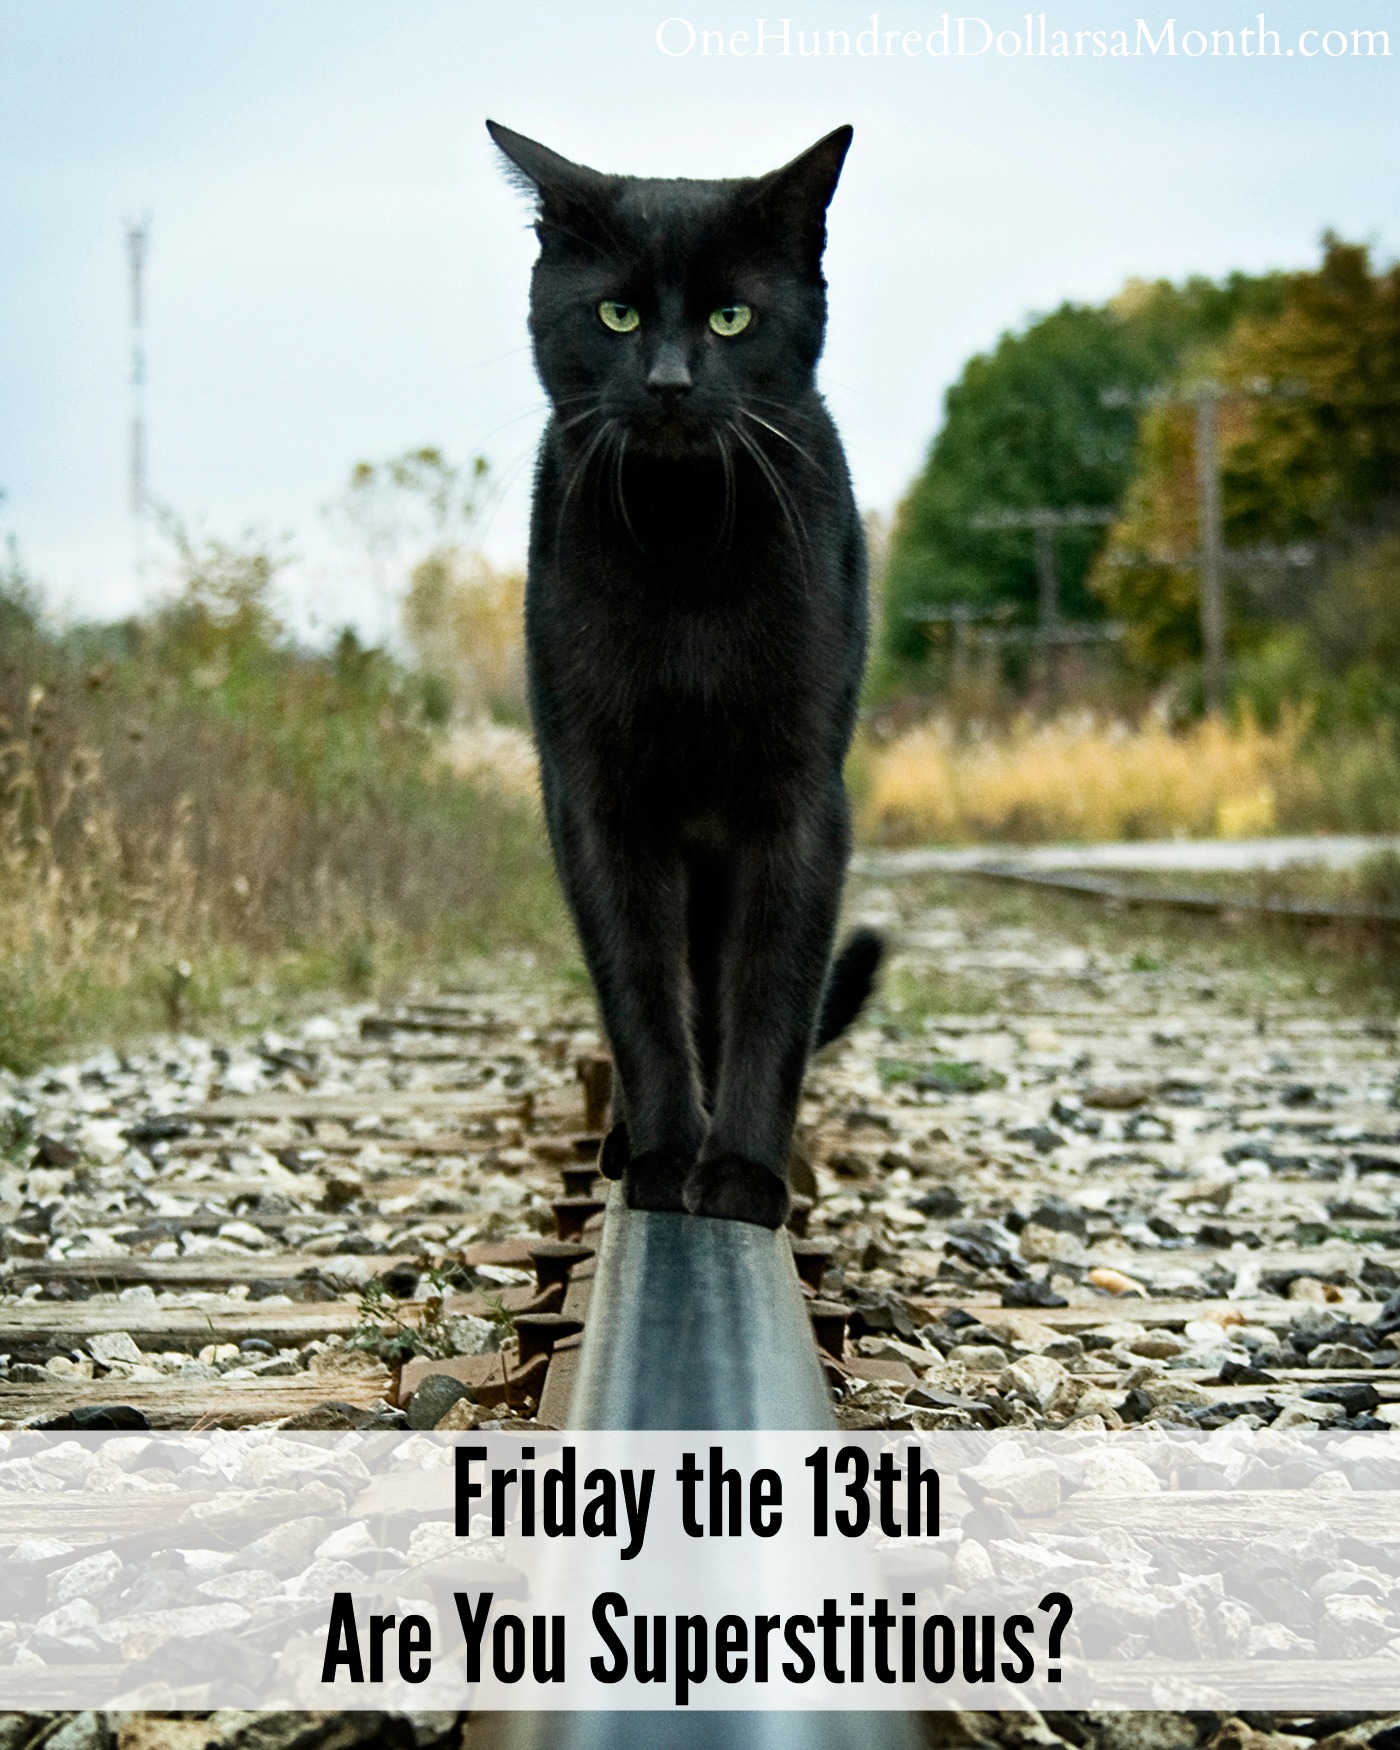 Friday the 13th – Are You Superstitious?